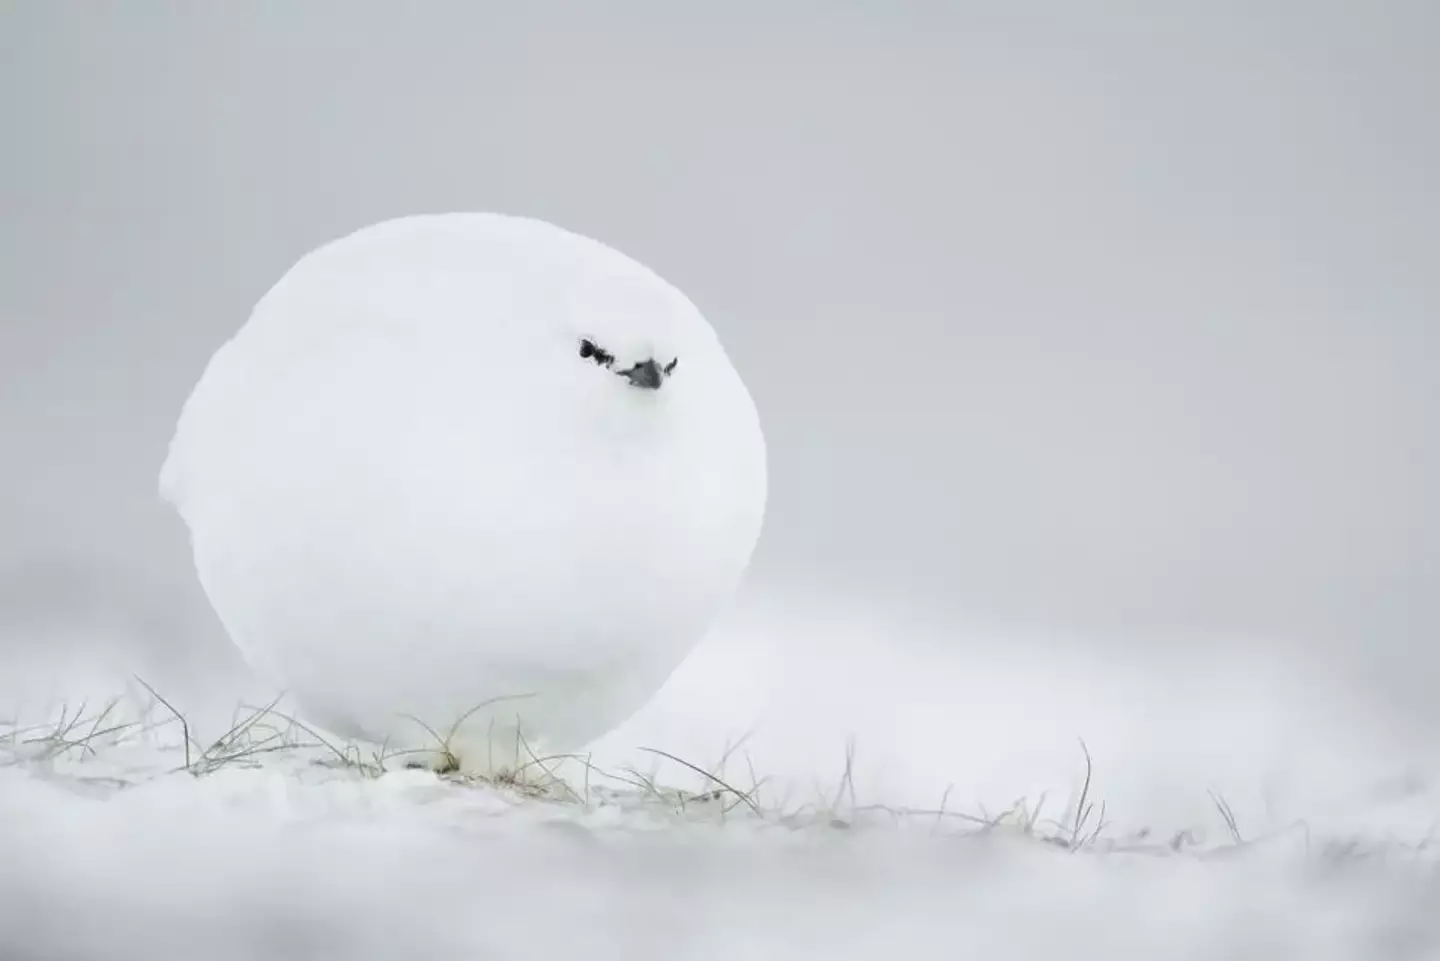 Snowball or grouse?